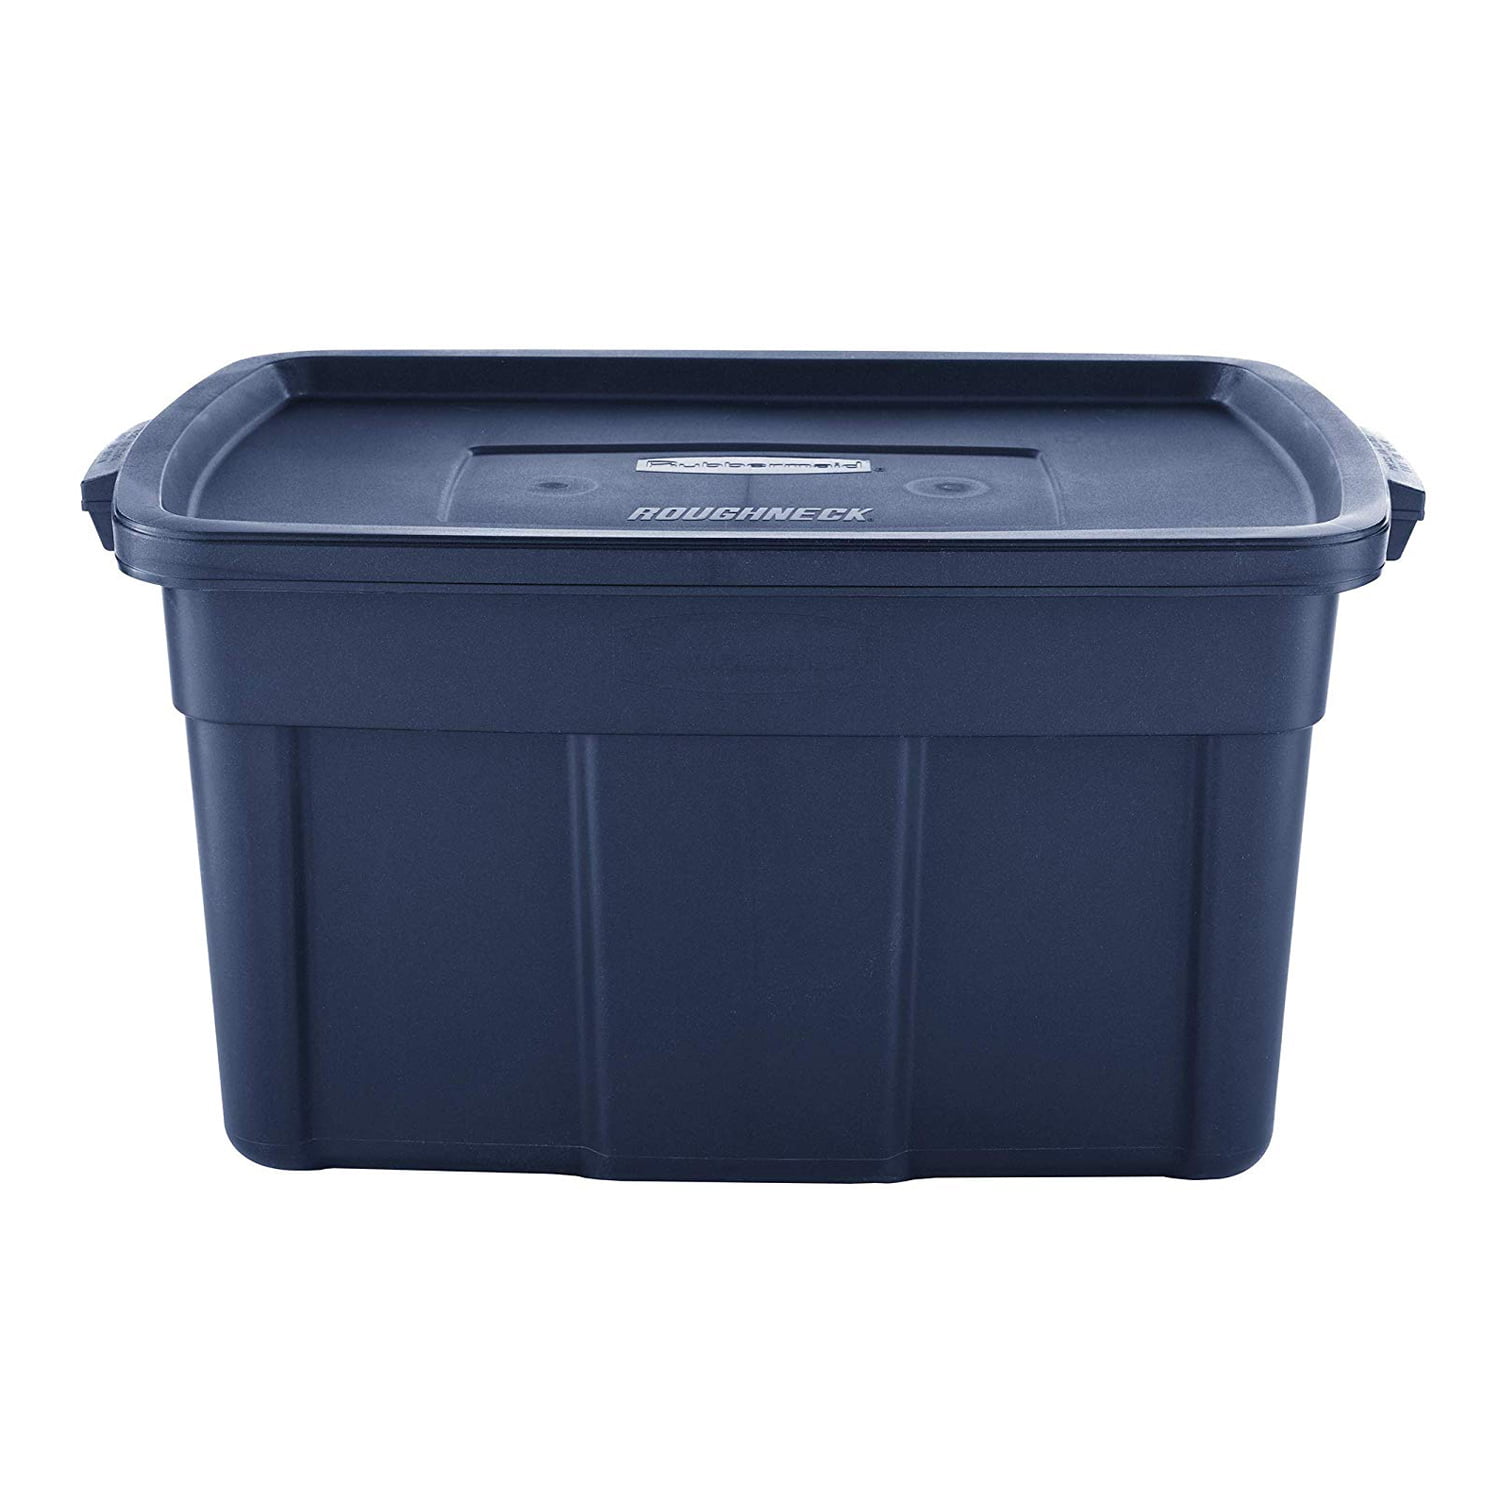 Rubbermaid Roughneck 3 Gallon Rugged Plastic Reusable Stackable Home  Storage Totes with Lids, Dark Indigo Metallic (12 Pack)